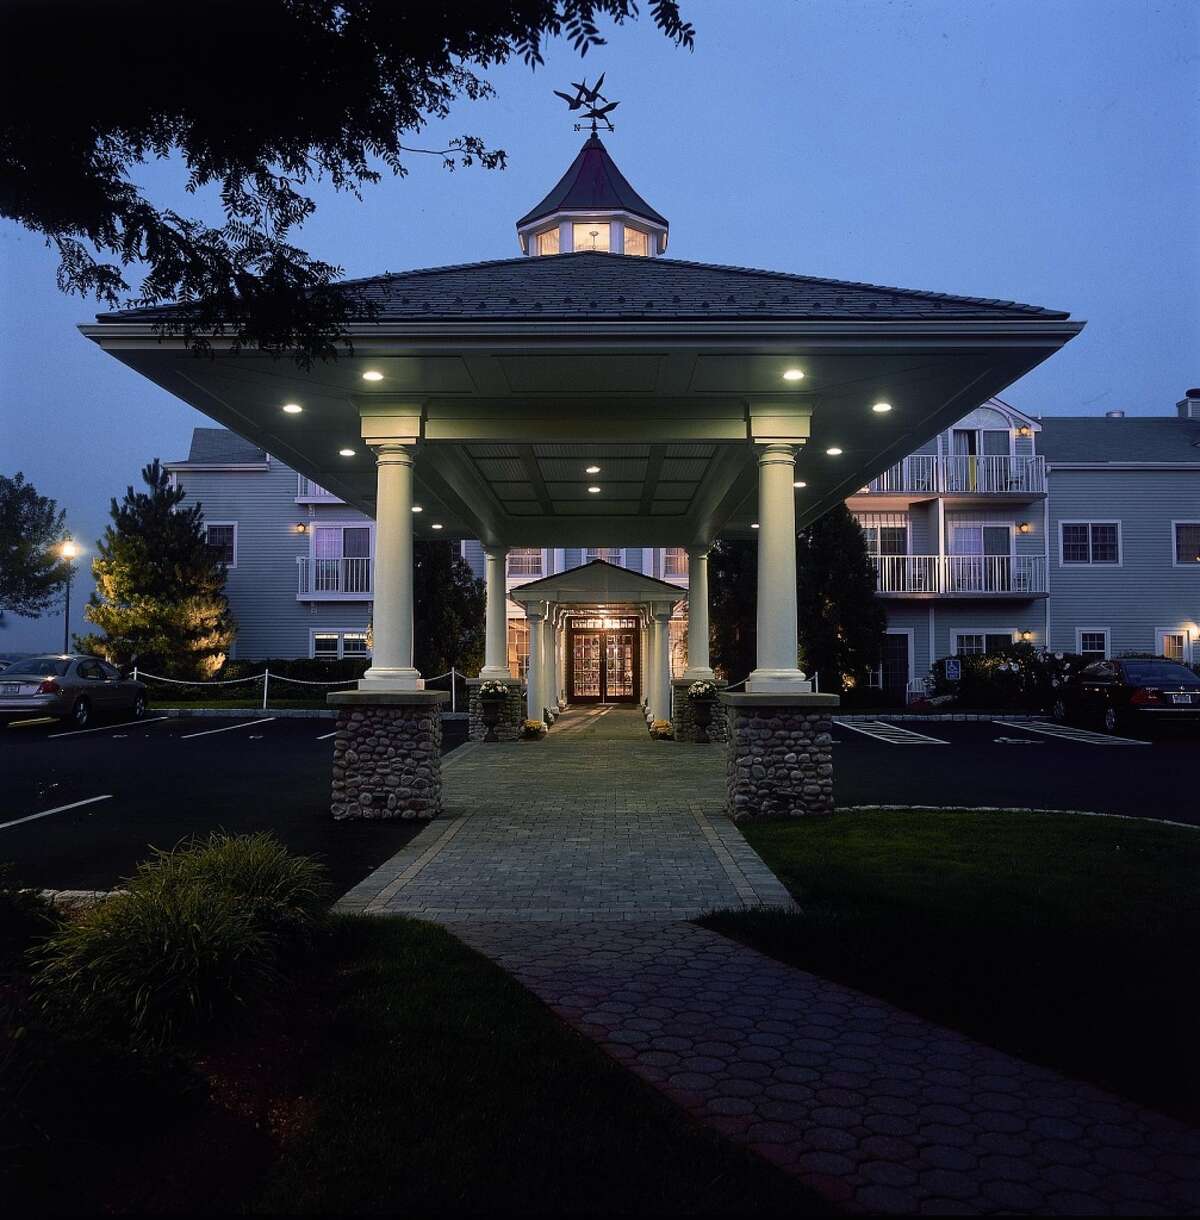 Saybrook Point Inn & Spa will hold a New Year's Eve Gala in its Grand Waterfront Ballroom. The night starts with a cocktail reception at 8pm. Then, guests can enjoy a buffet, open bar, music, and a champagne toast.